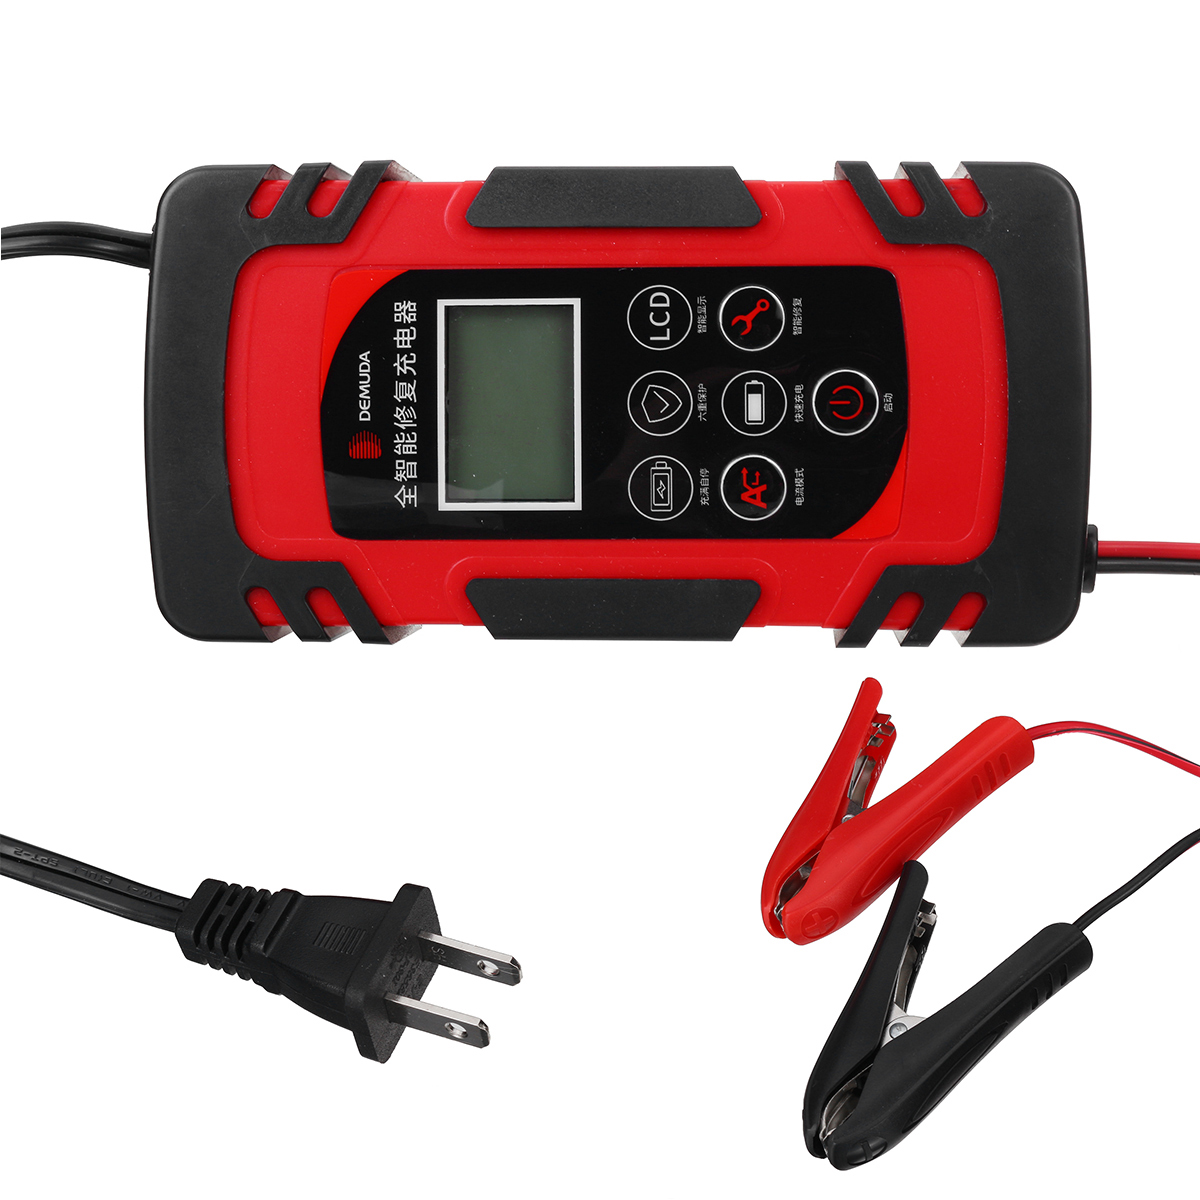 100W 12V/24V LCD Car Battery Charger Pulse Trickle Motorcycle Boat RV Maintainer Smart Repair Battery Charging Activation - Auto GoShop